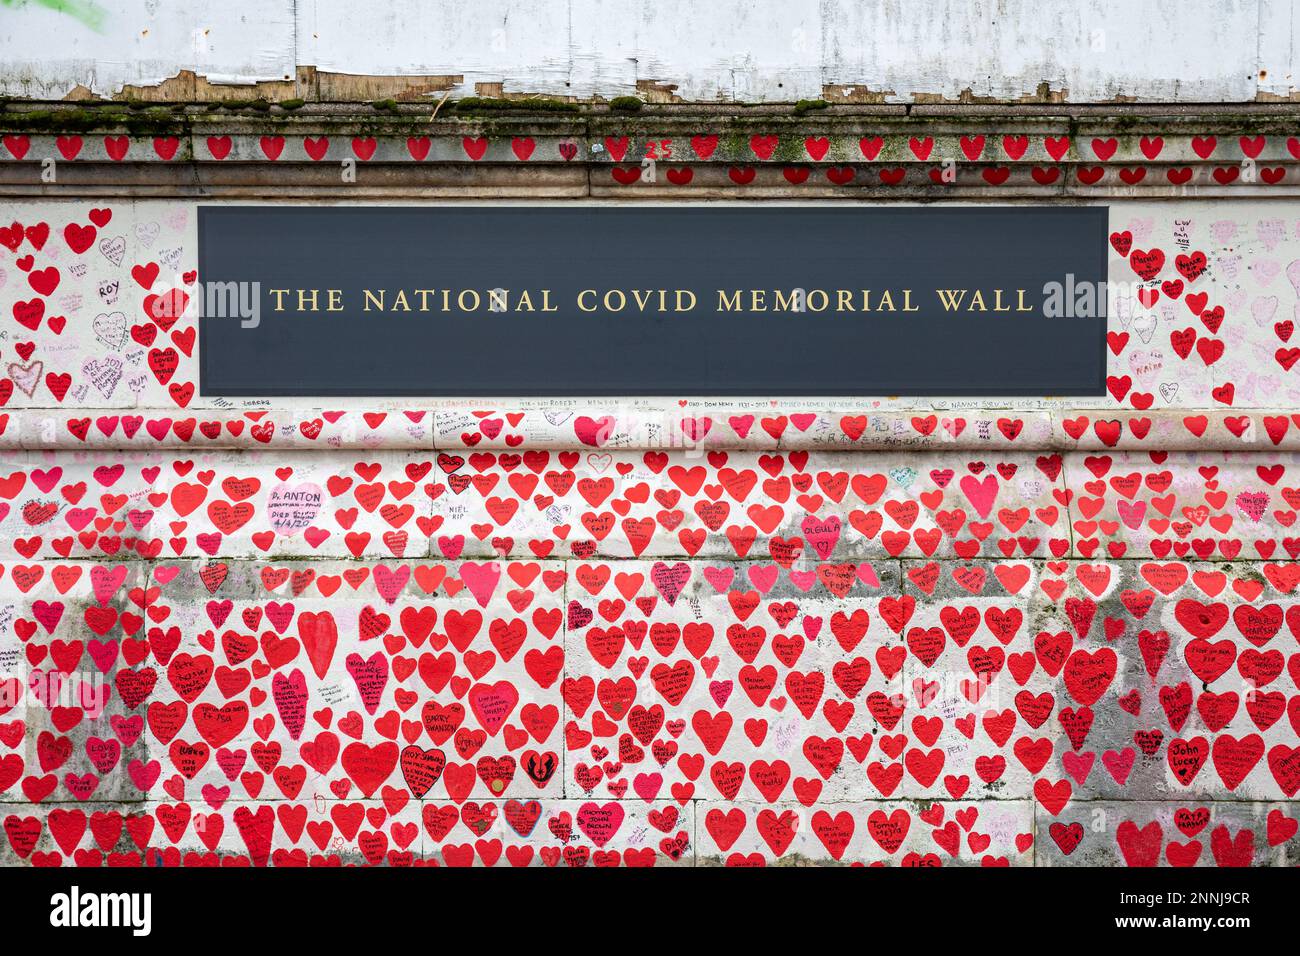 The National Covid Memorial Wall for commemorating the victims of COVID-19 pandemic in South Bank district of London, England Stock Photo